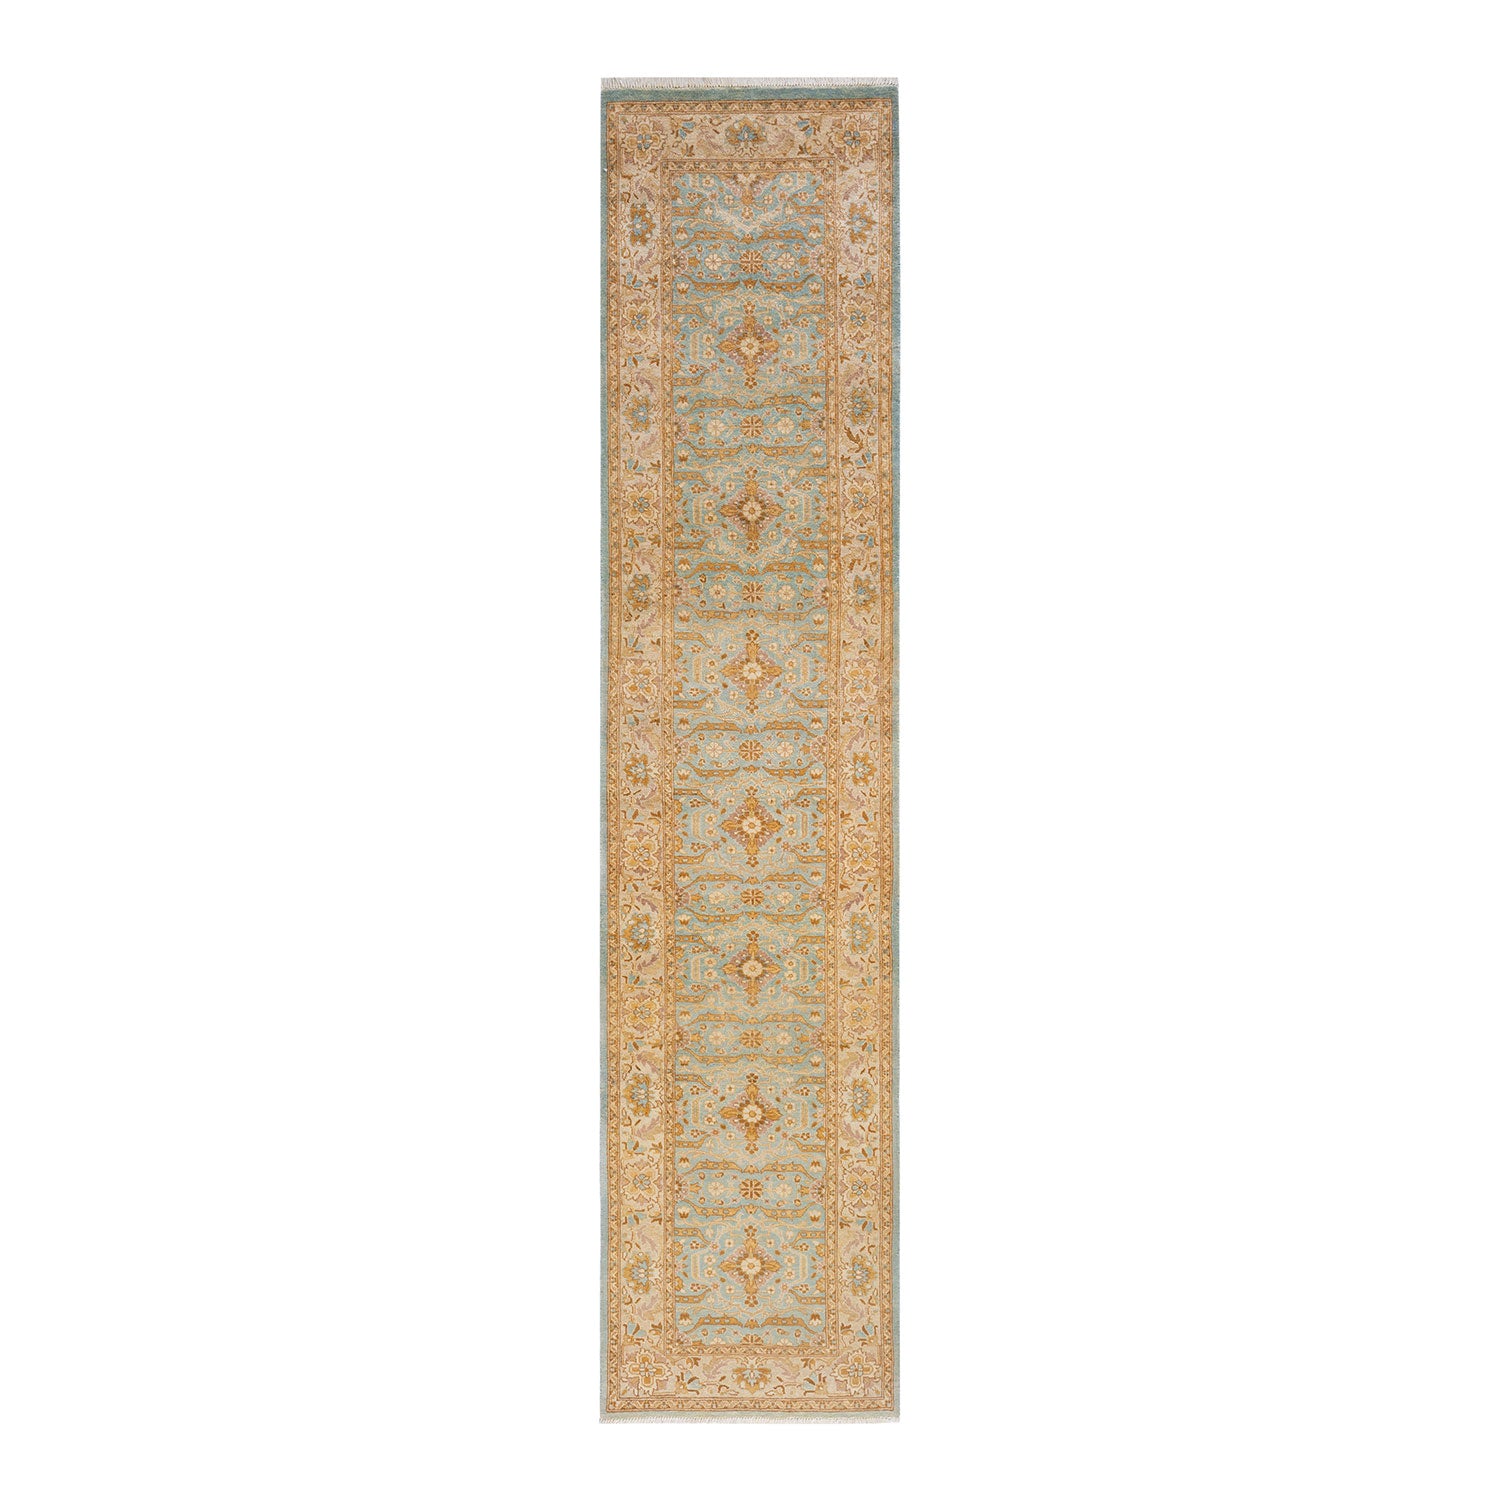 Runner rug with ornate design and geometric shapes in blue.